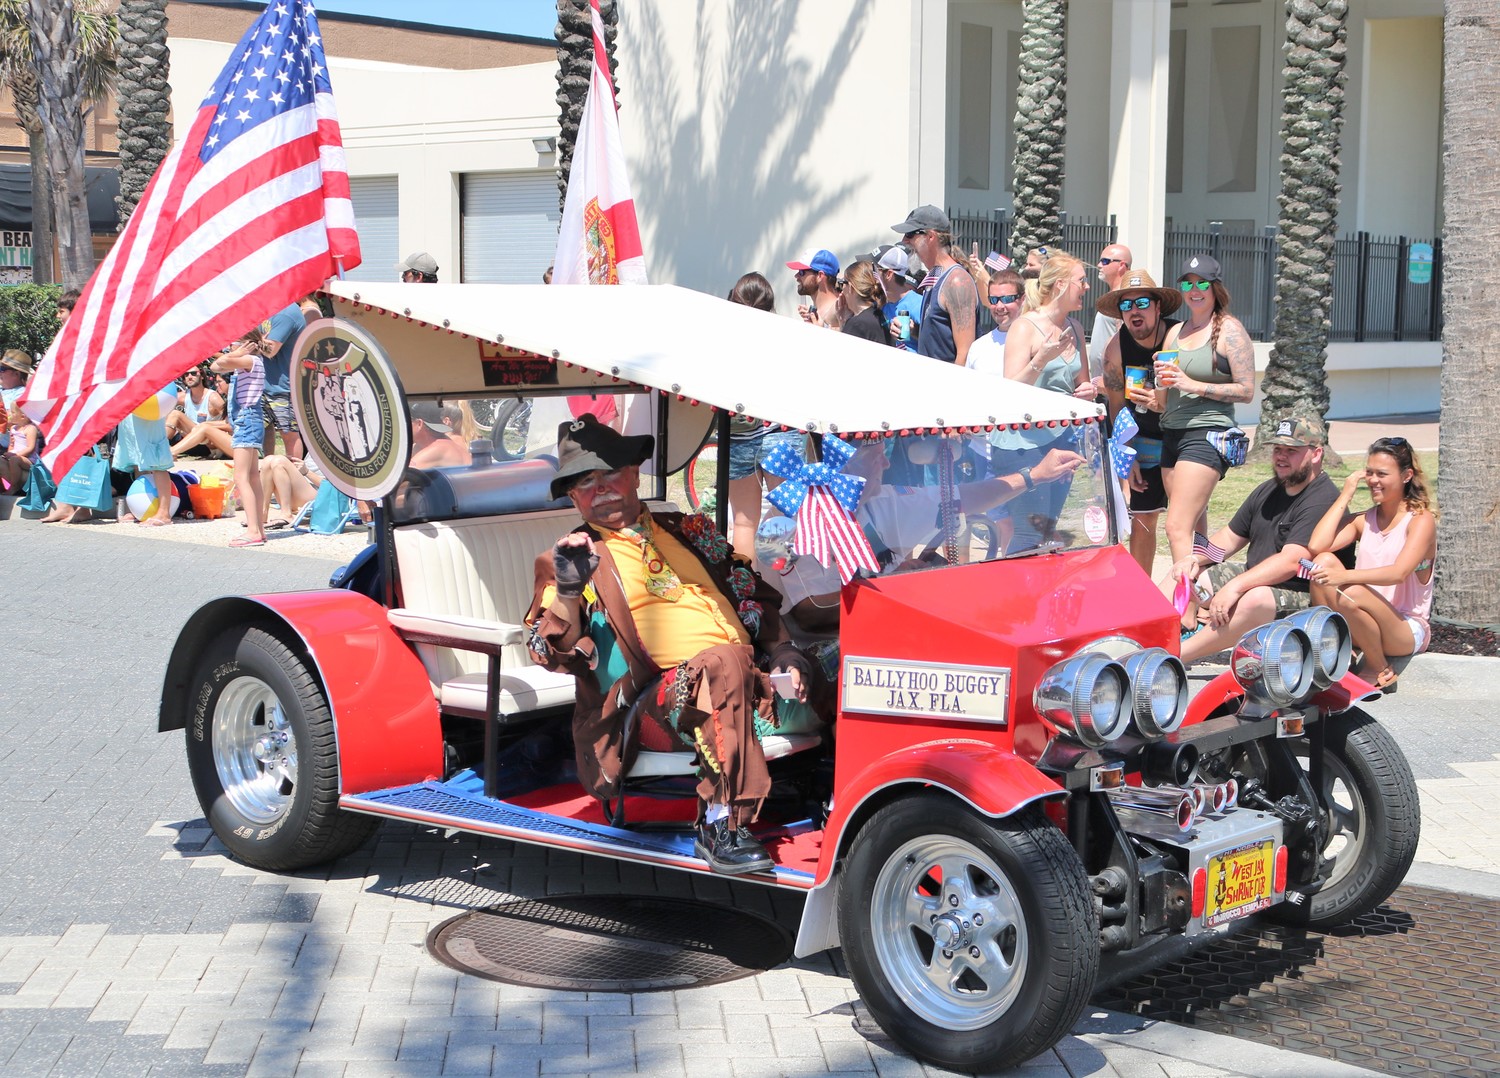 An elaborately costumed man sits in the front seat of one of the Shriners Hospitals for Children’s many cars in the parade.